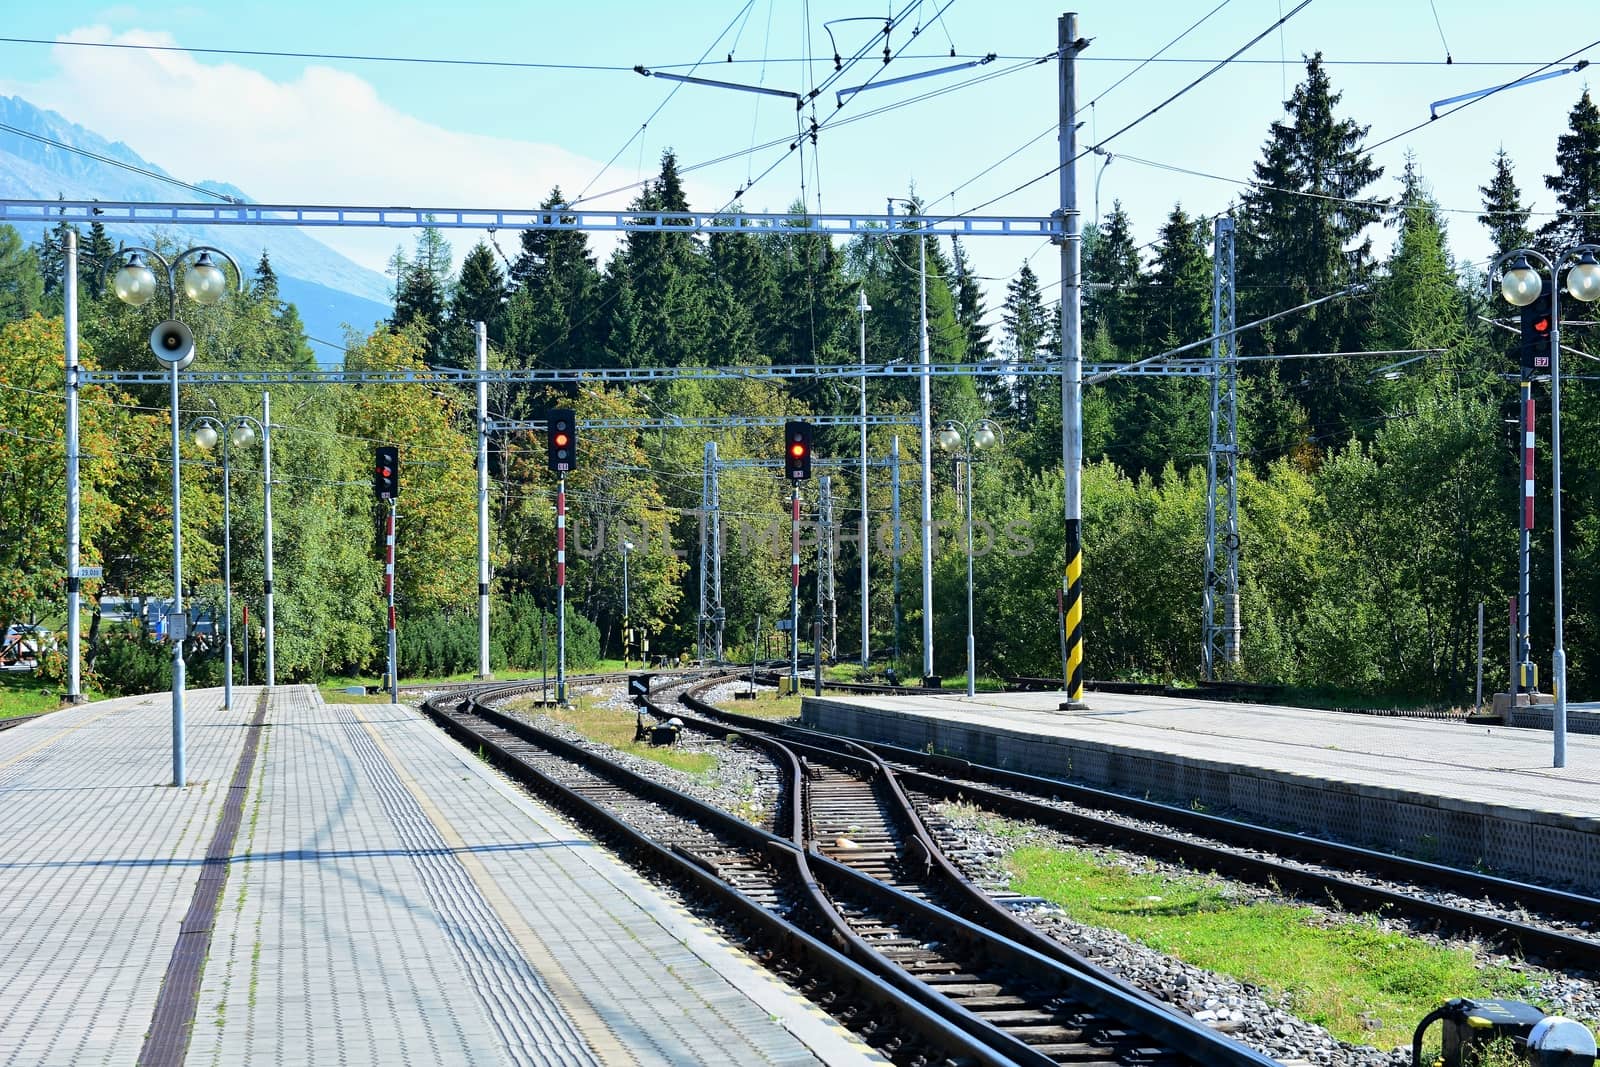 Empty platforms without trains and people at terminal railway station Strbske pleso in High Tatras, Slovakia.